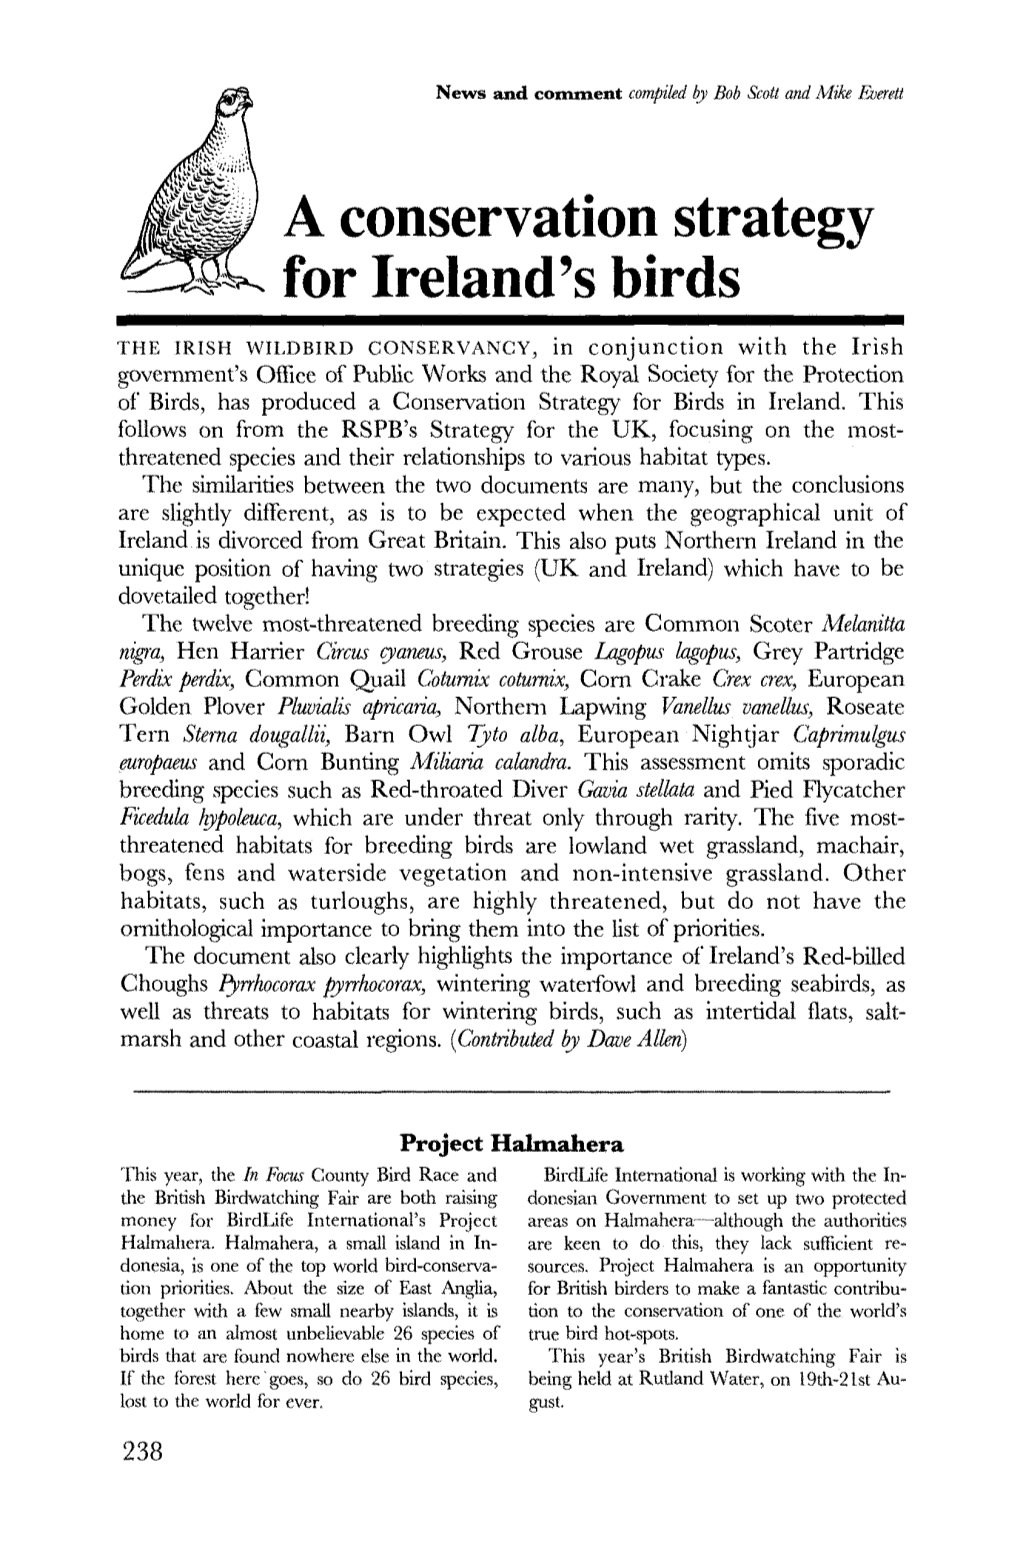 A Conservation Strategy for Ireland's Birds